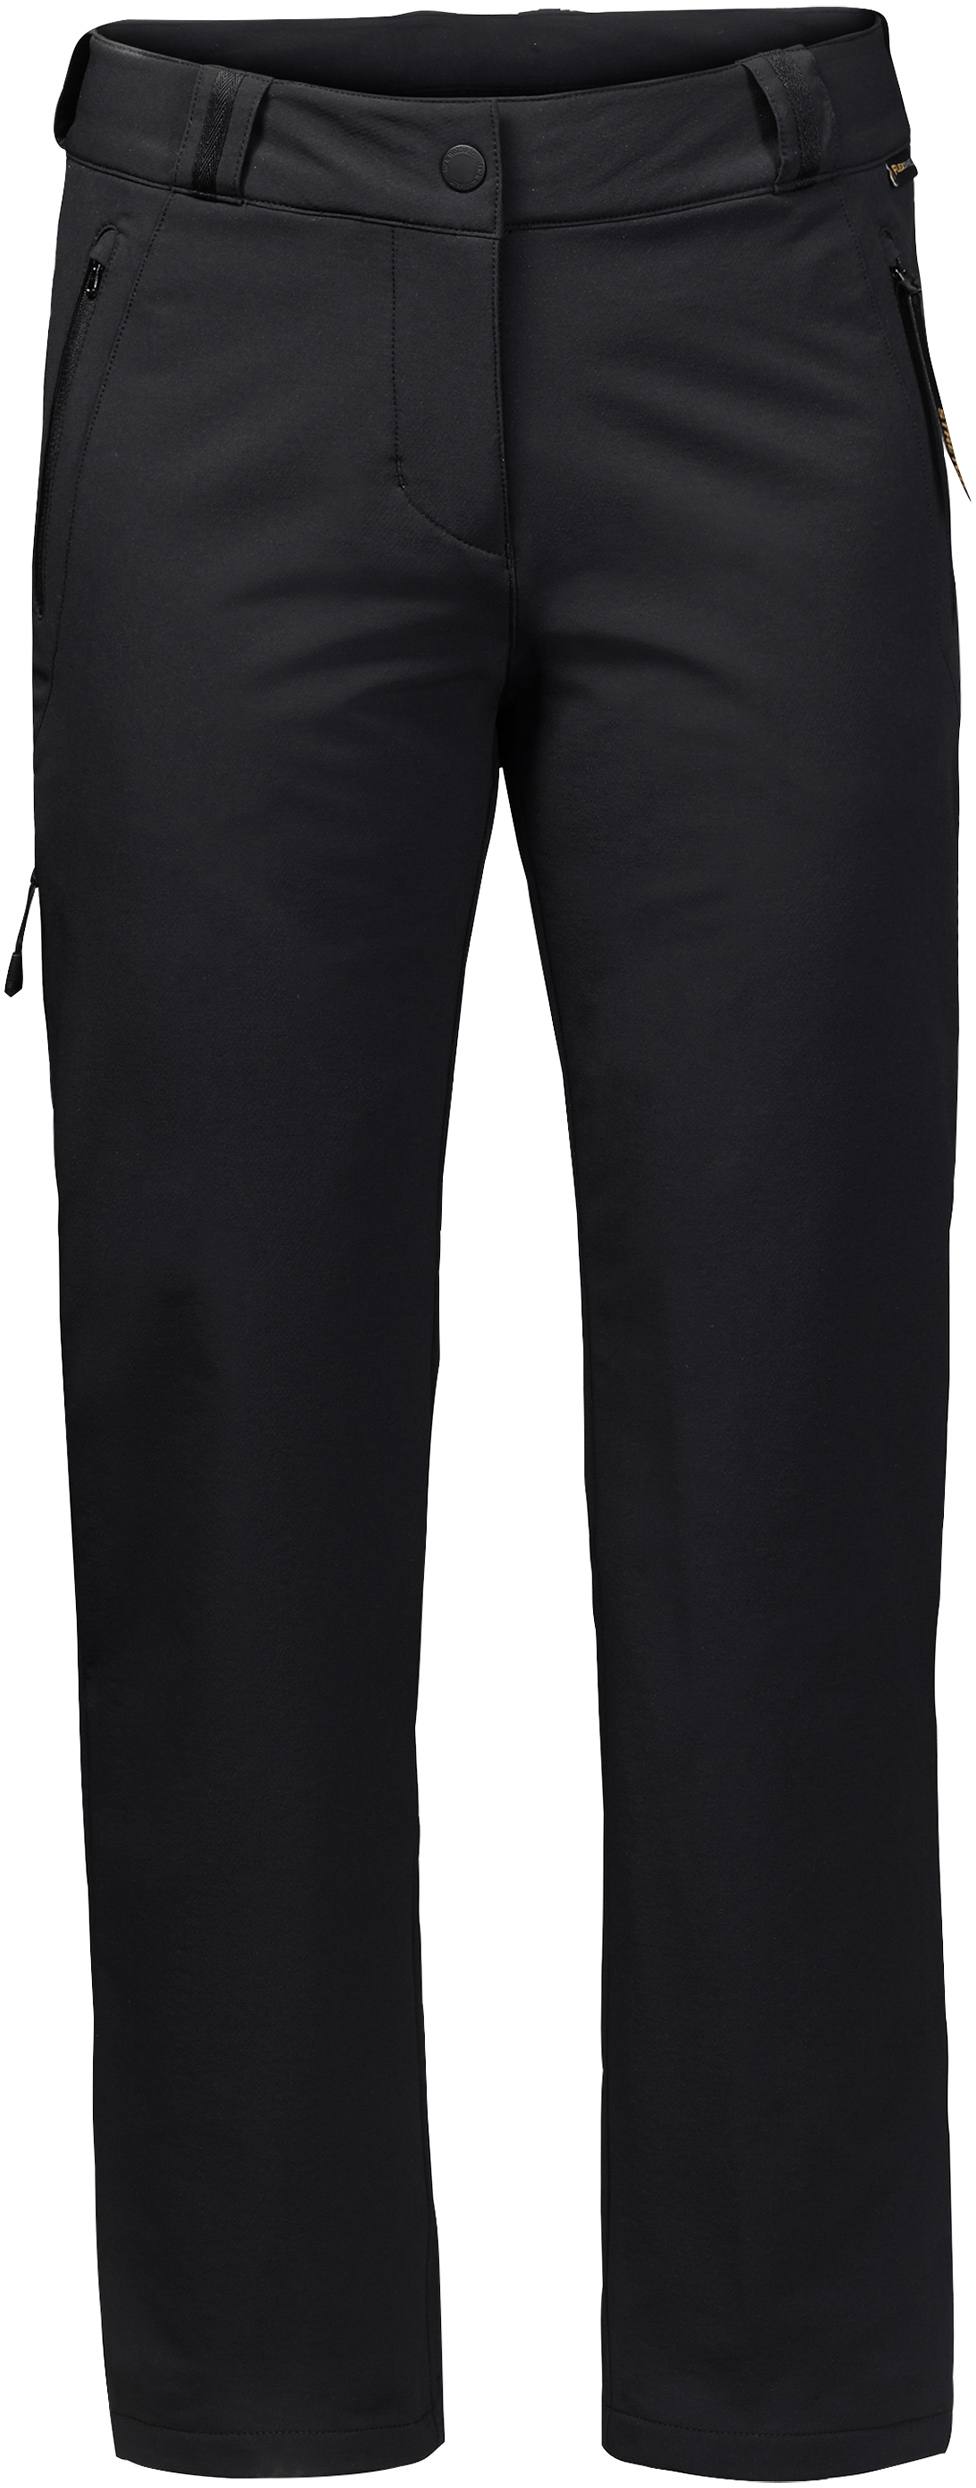 Jack Wolfskin Activate Thermic Women’s Pants Musta 46